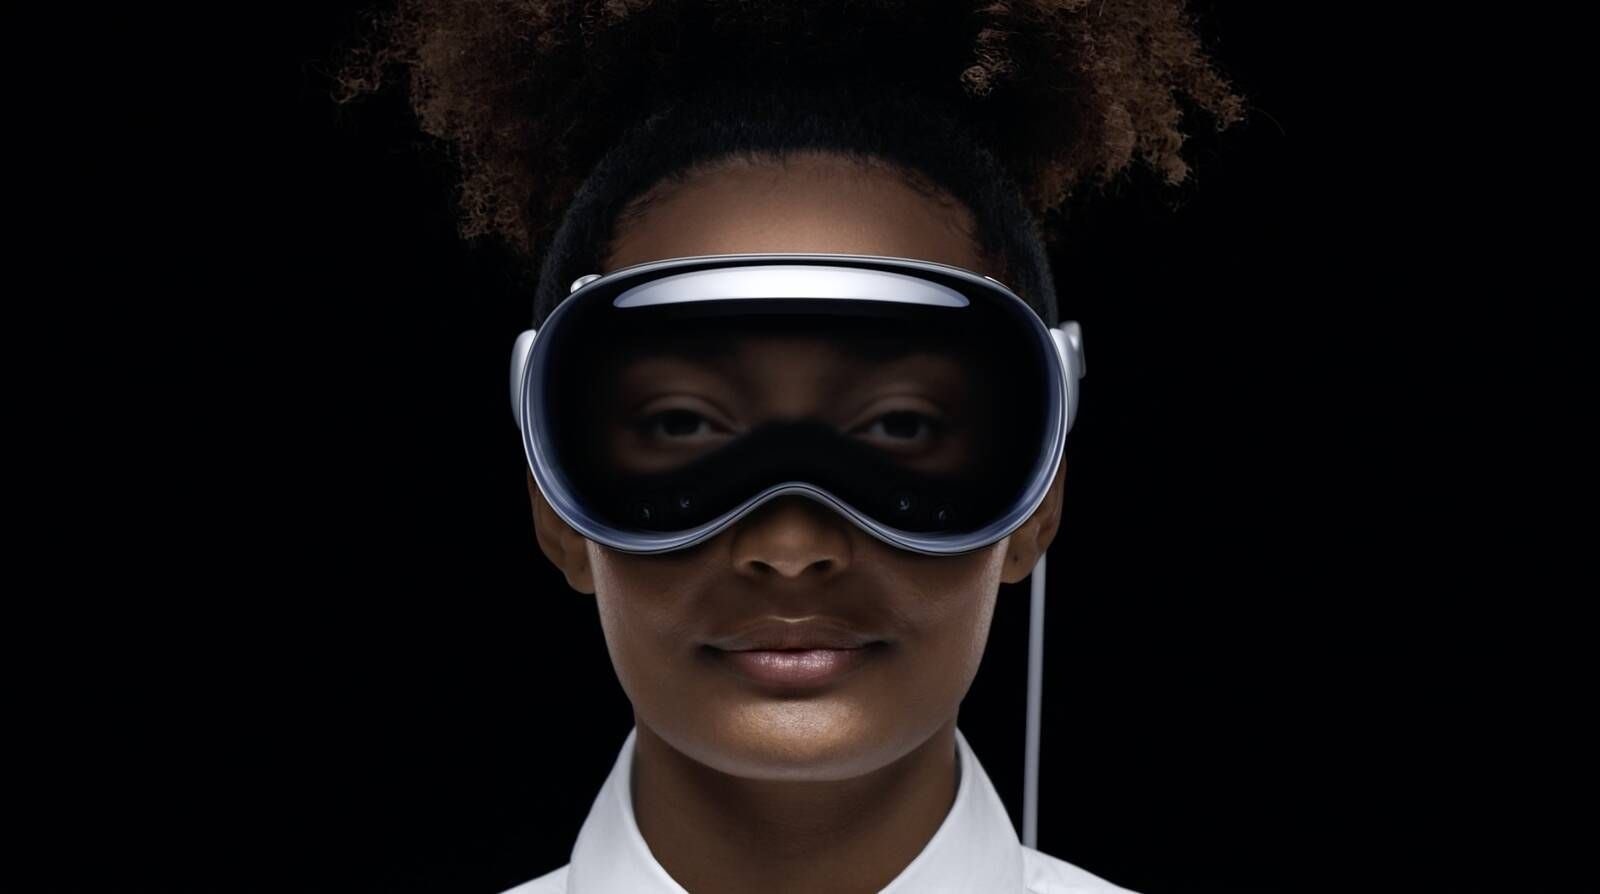 Apple has released its biggest product development in its post-Steve Jobs era — a mixed reality headset coined Vision Pro. What does it mean for luxury in Web3? Photo: Apple